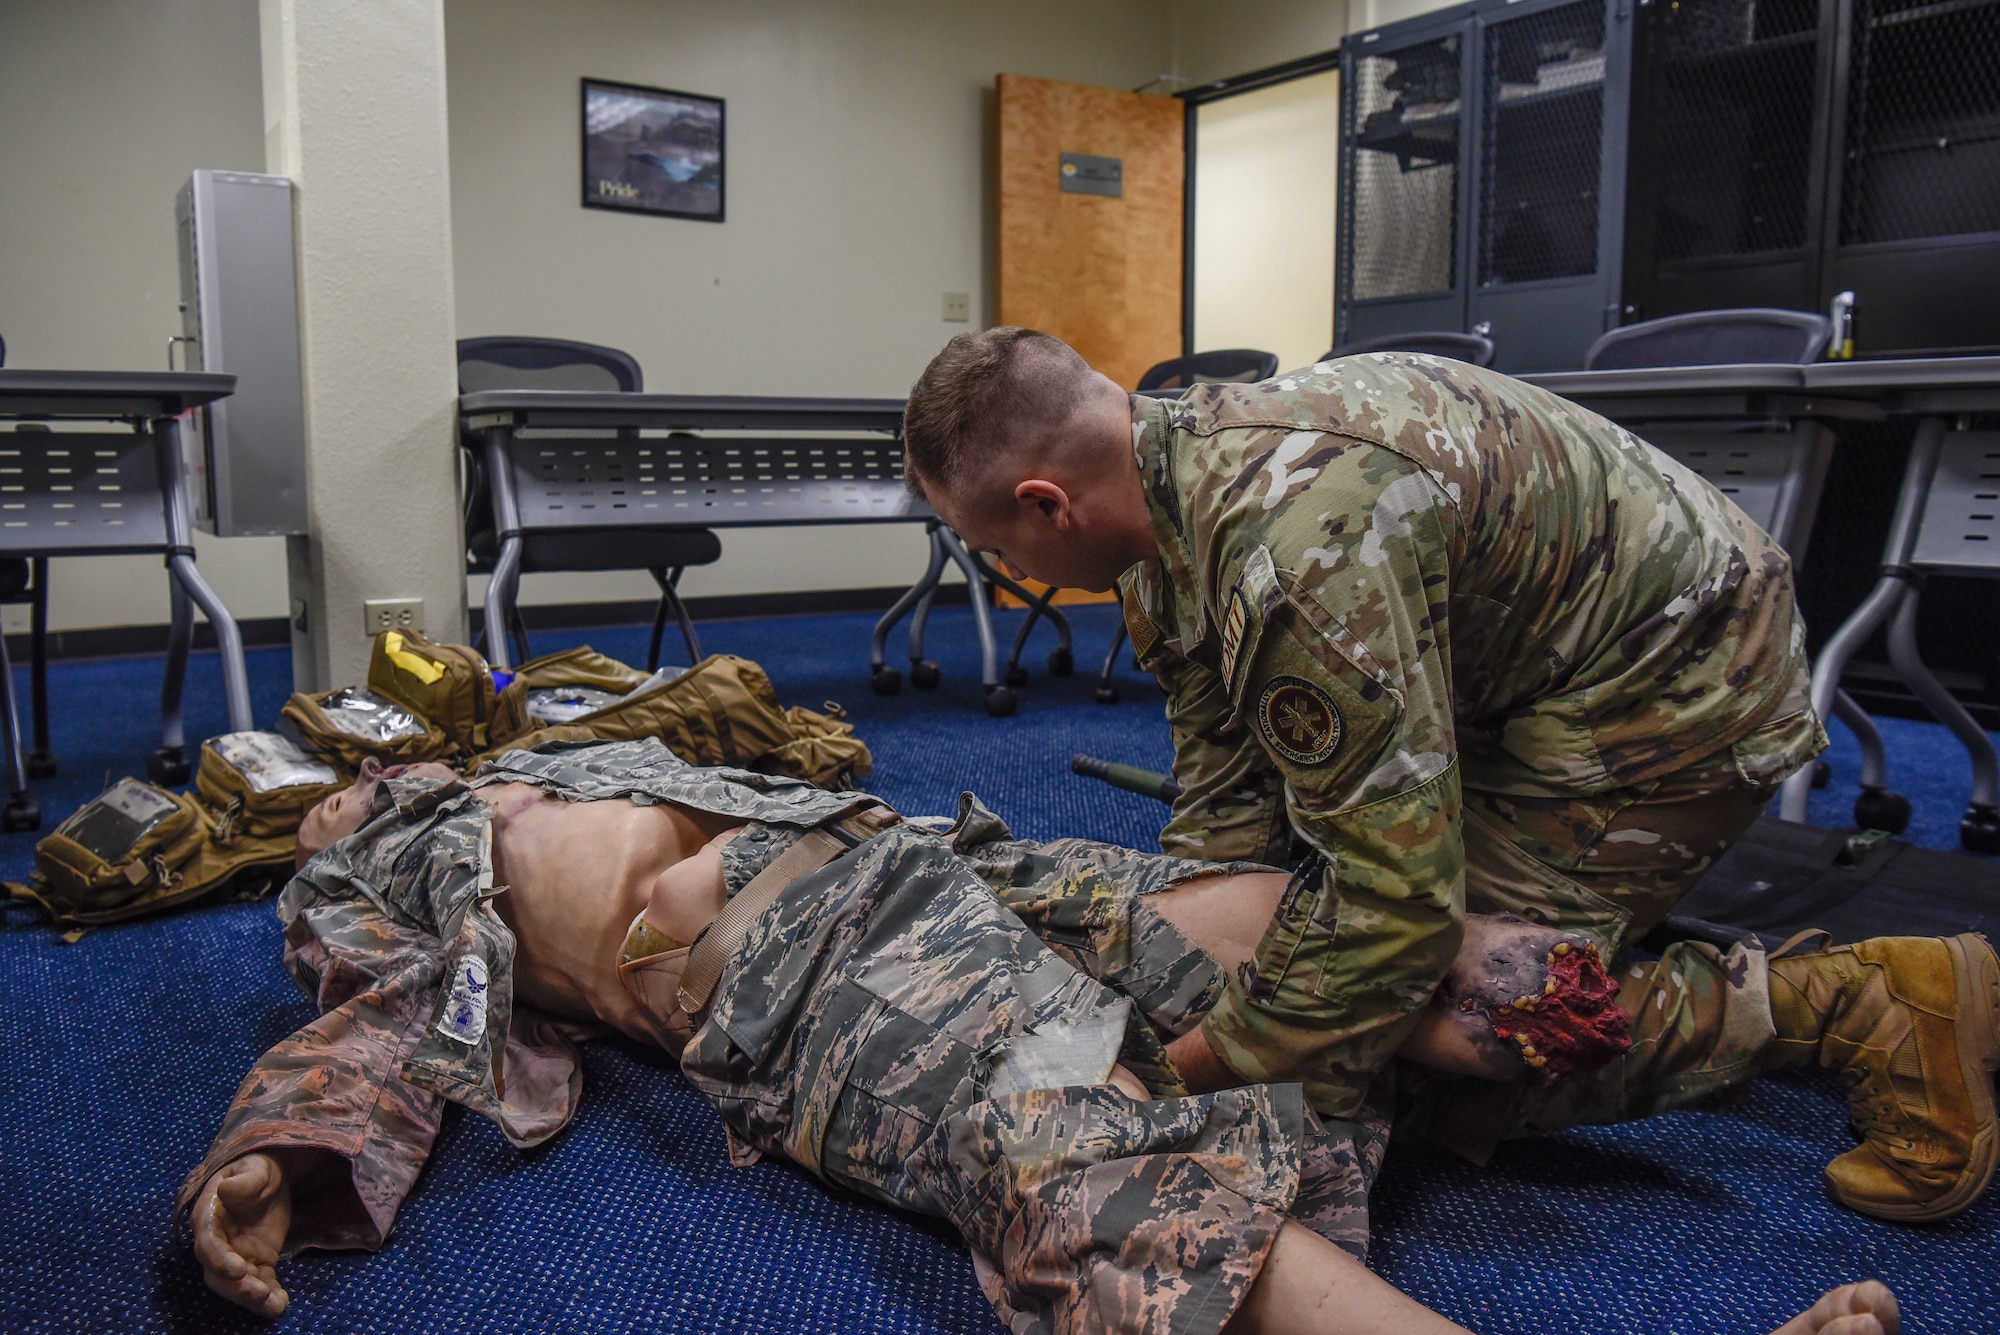 U.S. Air Force Staff Sgt. Finn Tipps, an independent duty medical technician assigned to the 36th Contingency Response Support Squadron, practices troop combat casualty care on a training mannequin on August 8, 2022, at Andersen Air Force Base, Guam. The skills Tipps has learned from the Air Force, allowed him to know how to provide care to a civilian in an off-base incident. (U.S. Air Force Photo by Airman 1st Class Allison Martin)